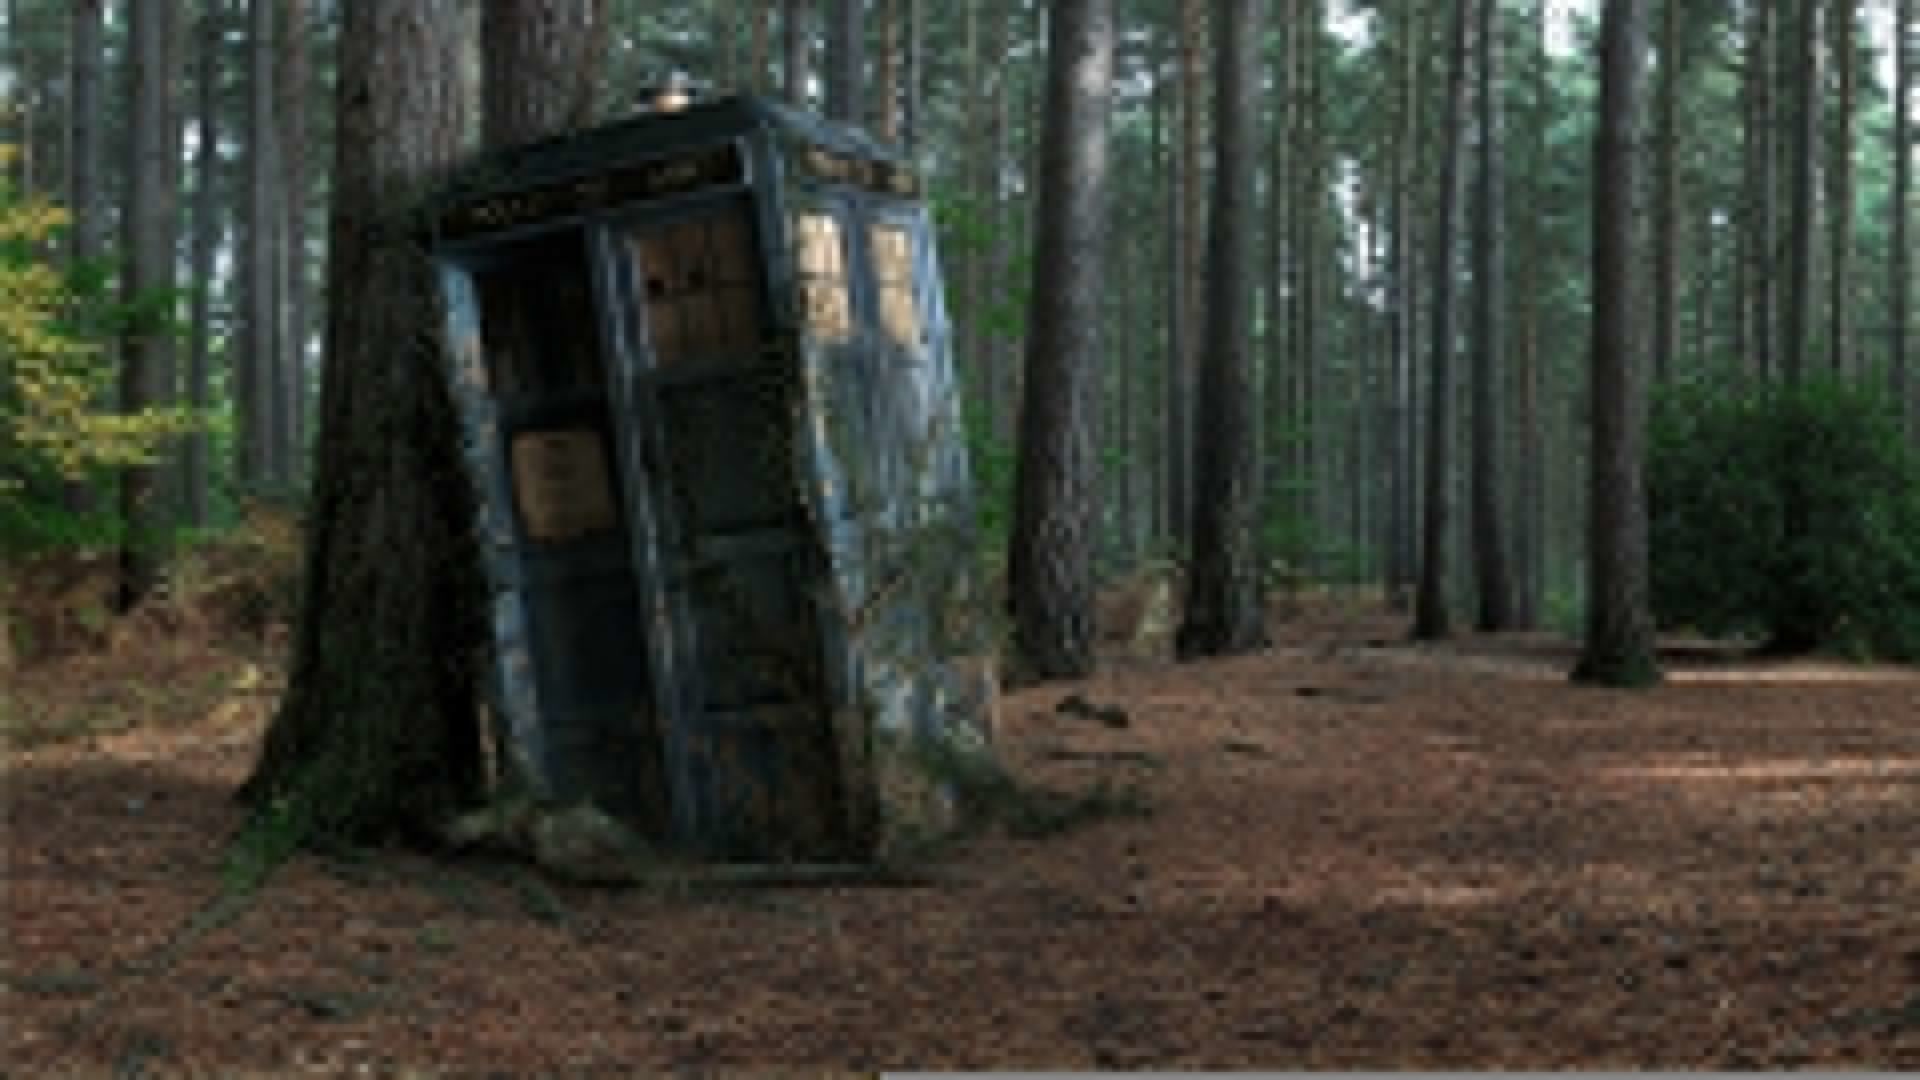 1920x1080 Abandoned TARDIS Doctor Who trees forest phone booth wallpaper .